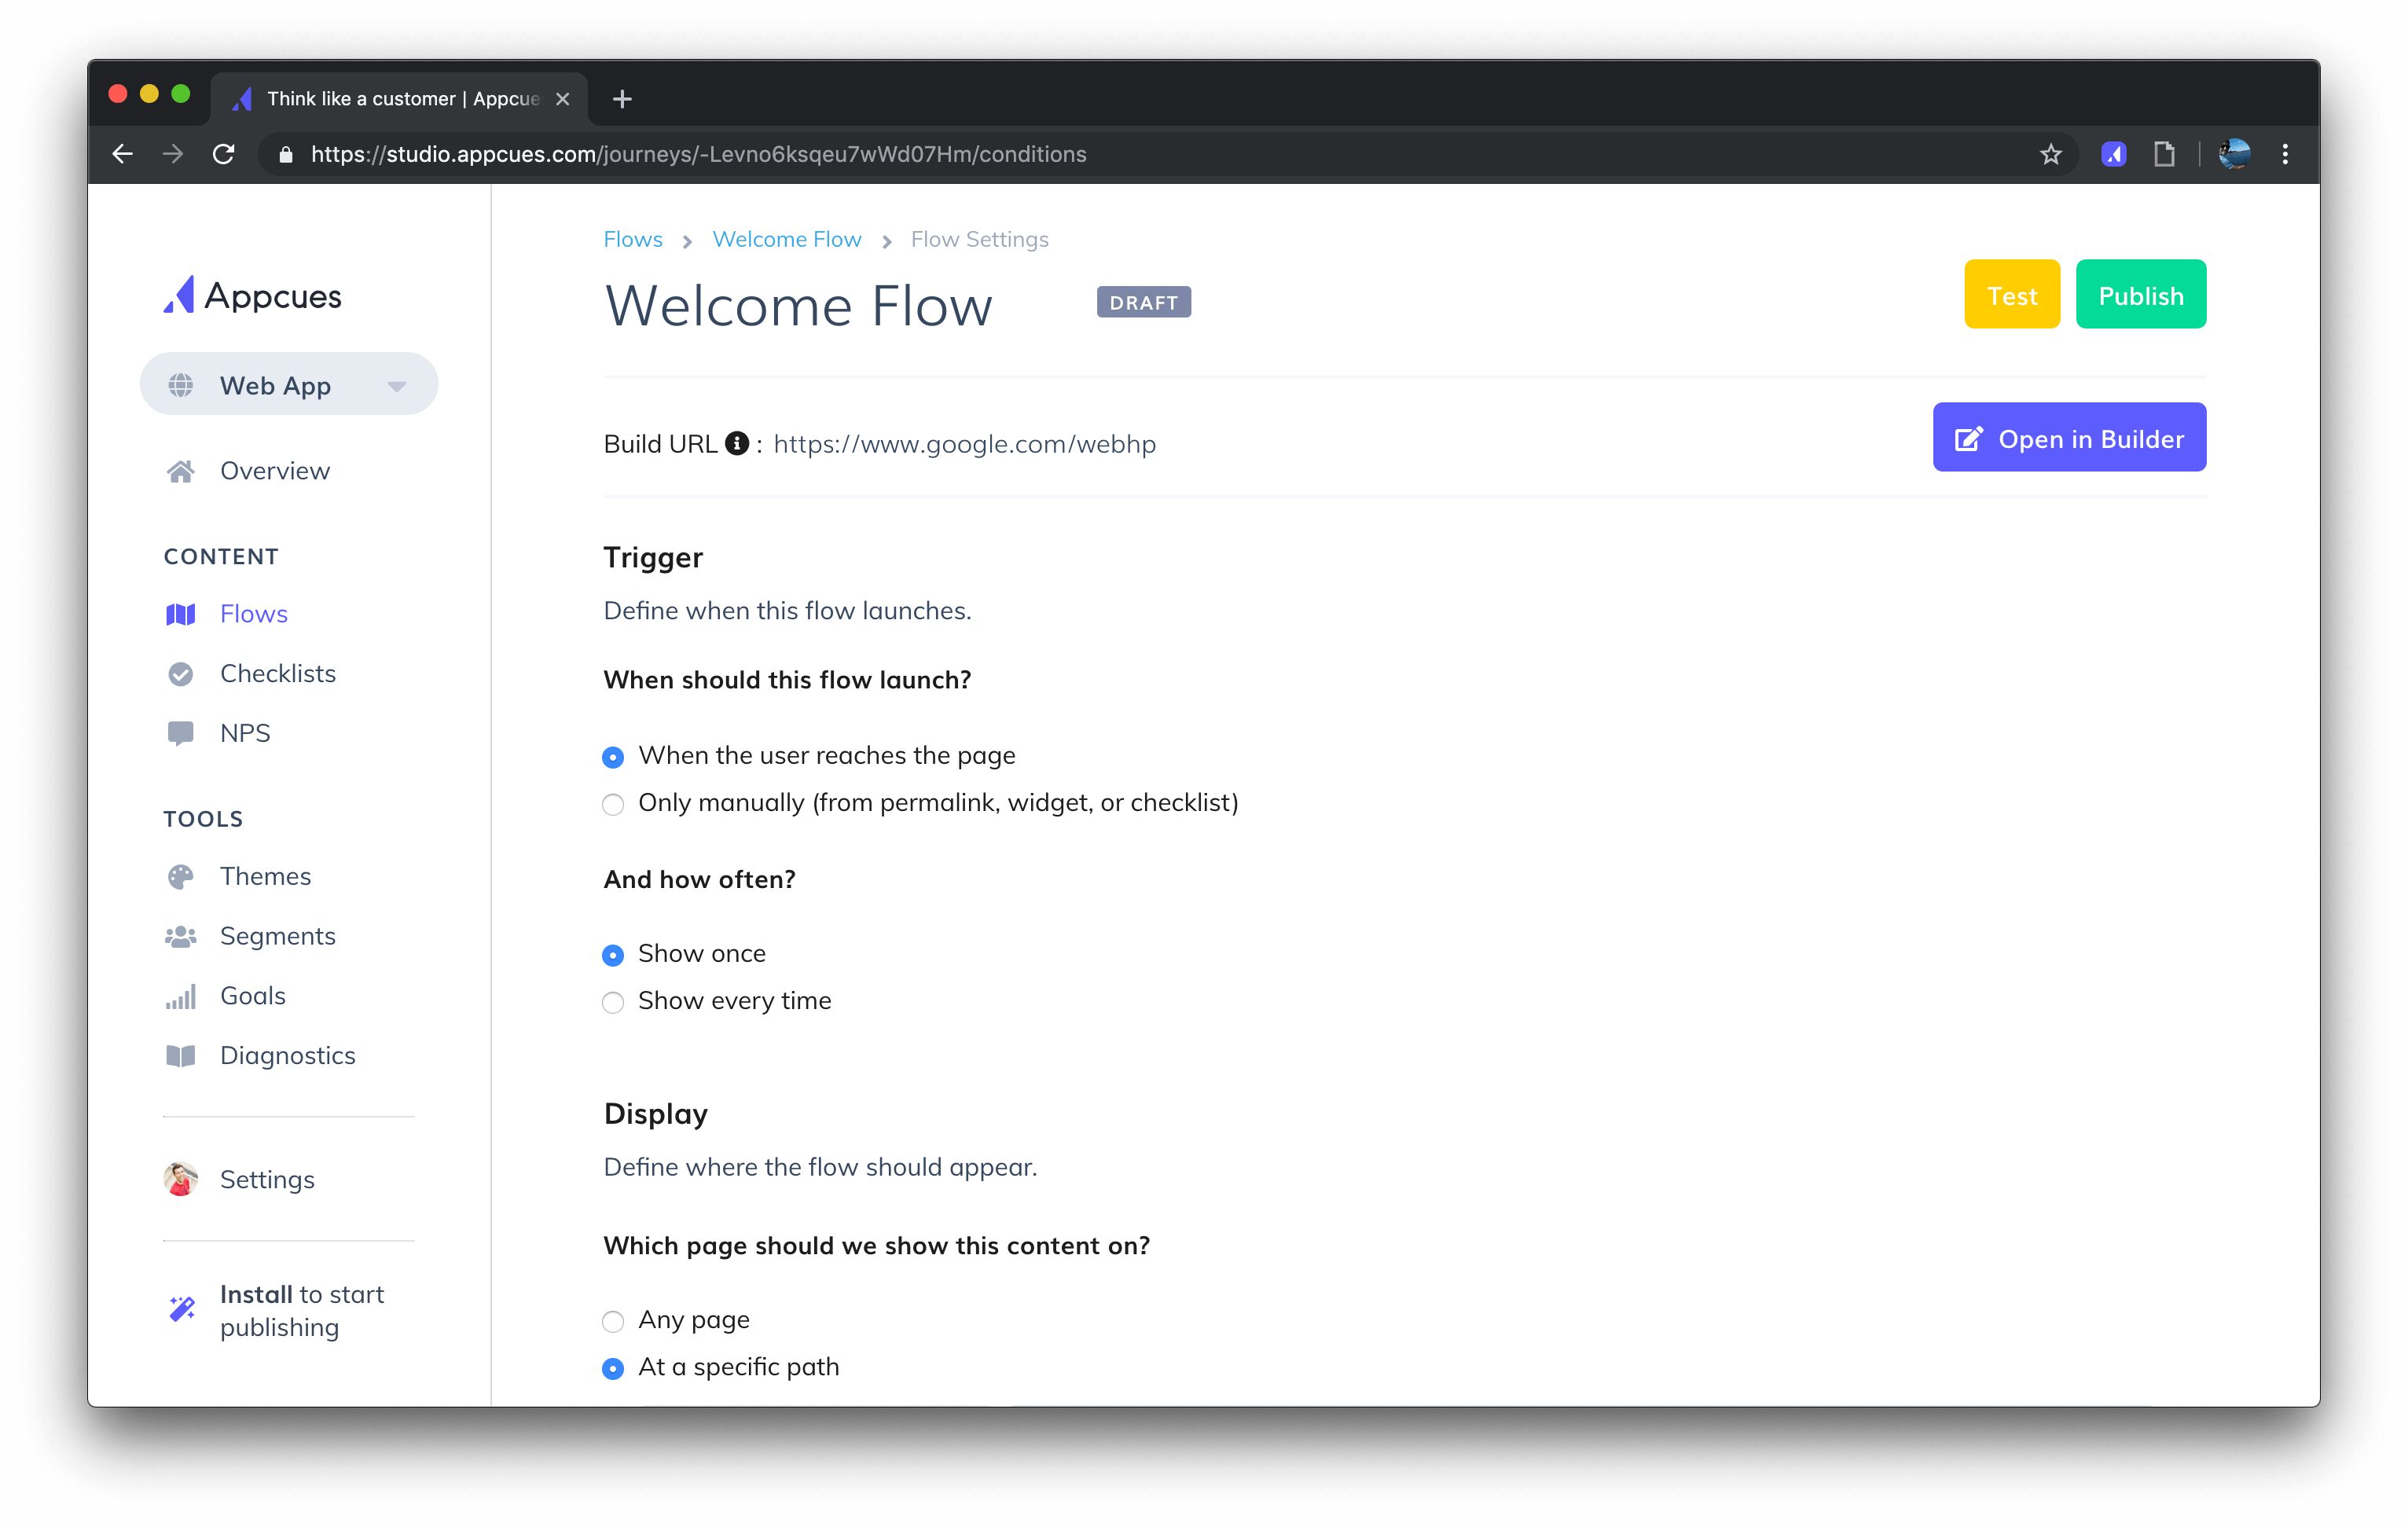 Screenshot of the updated settings for publishing a flow on Appcues